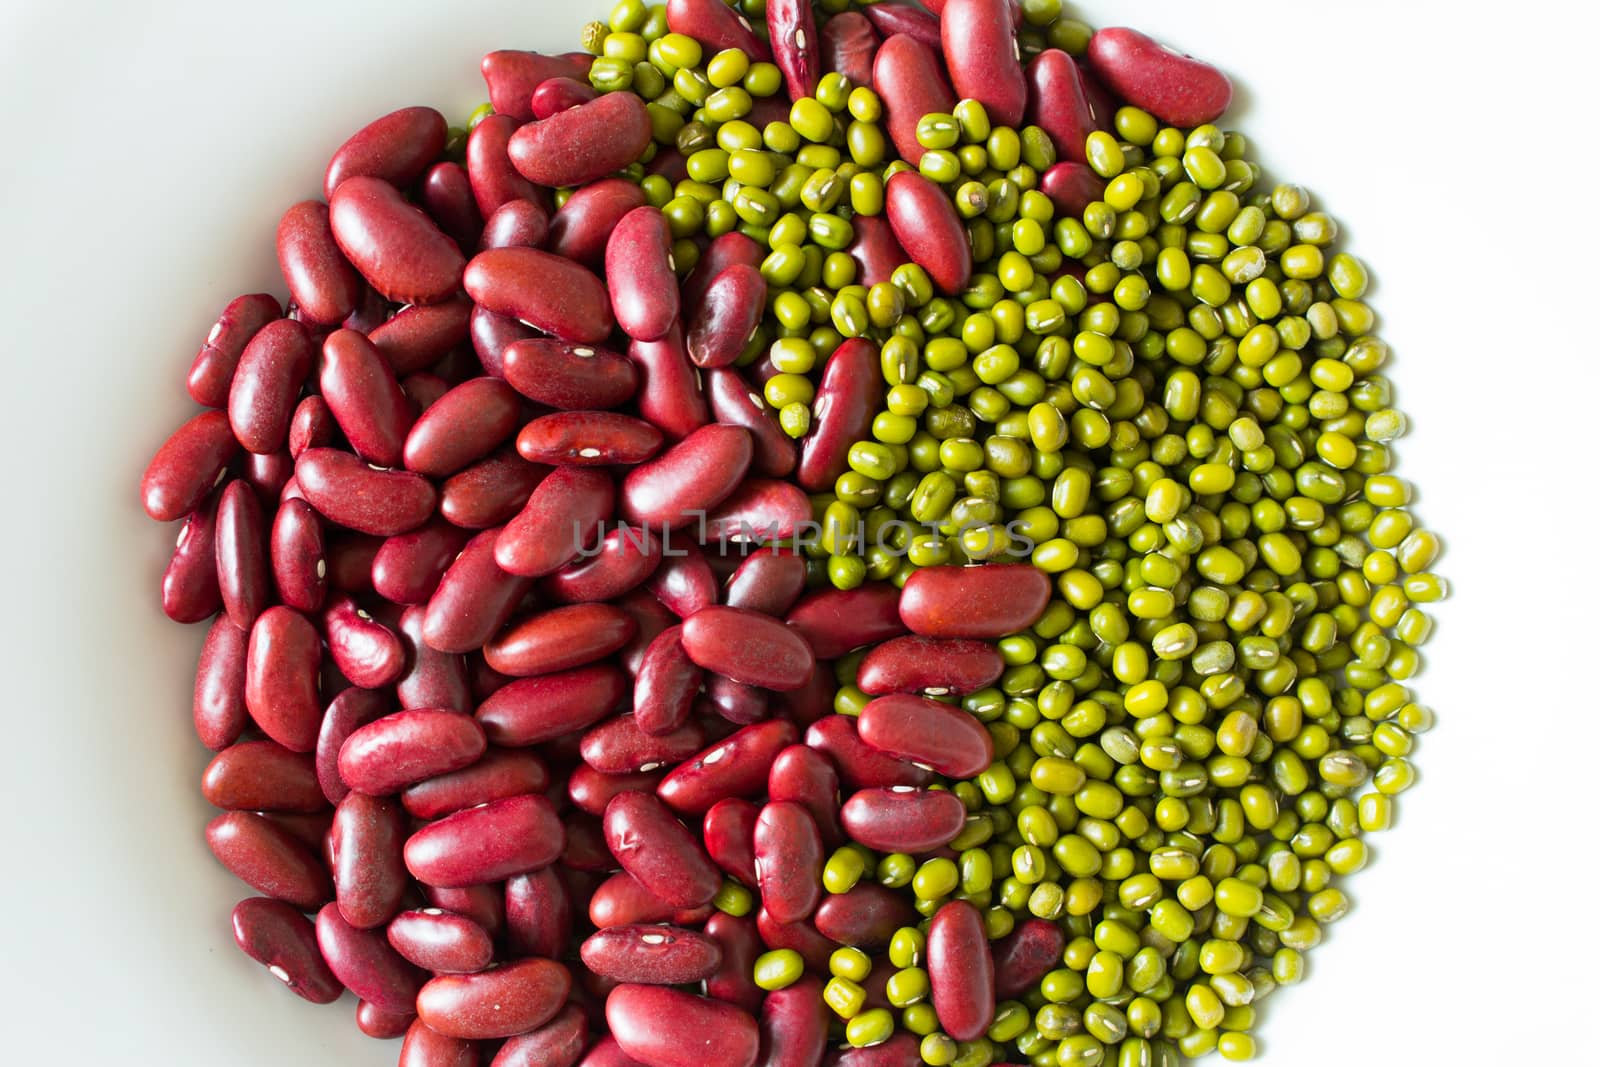 Background Texture of Red Beans Blended with Green Beans (Food Theme)